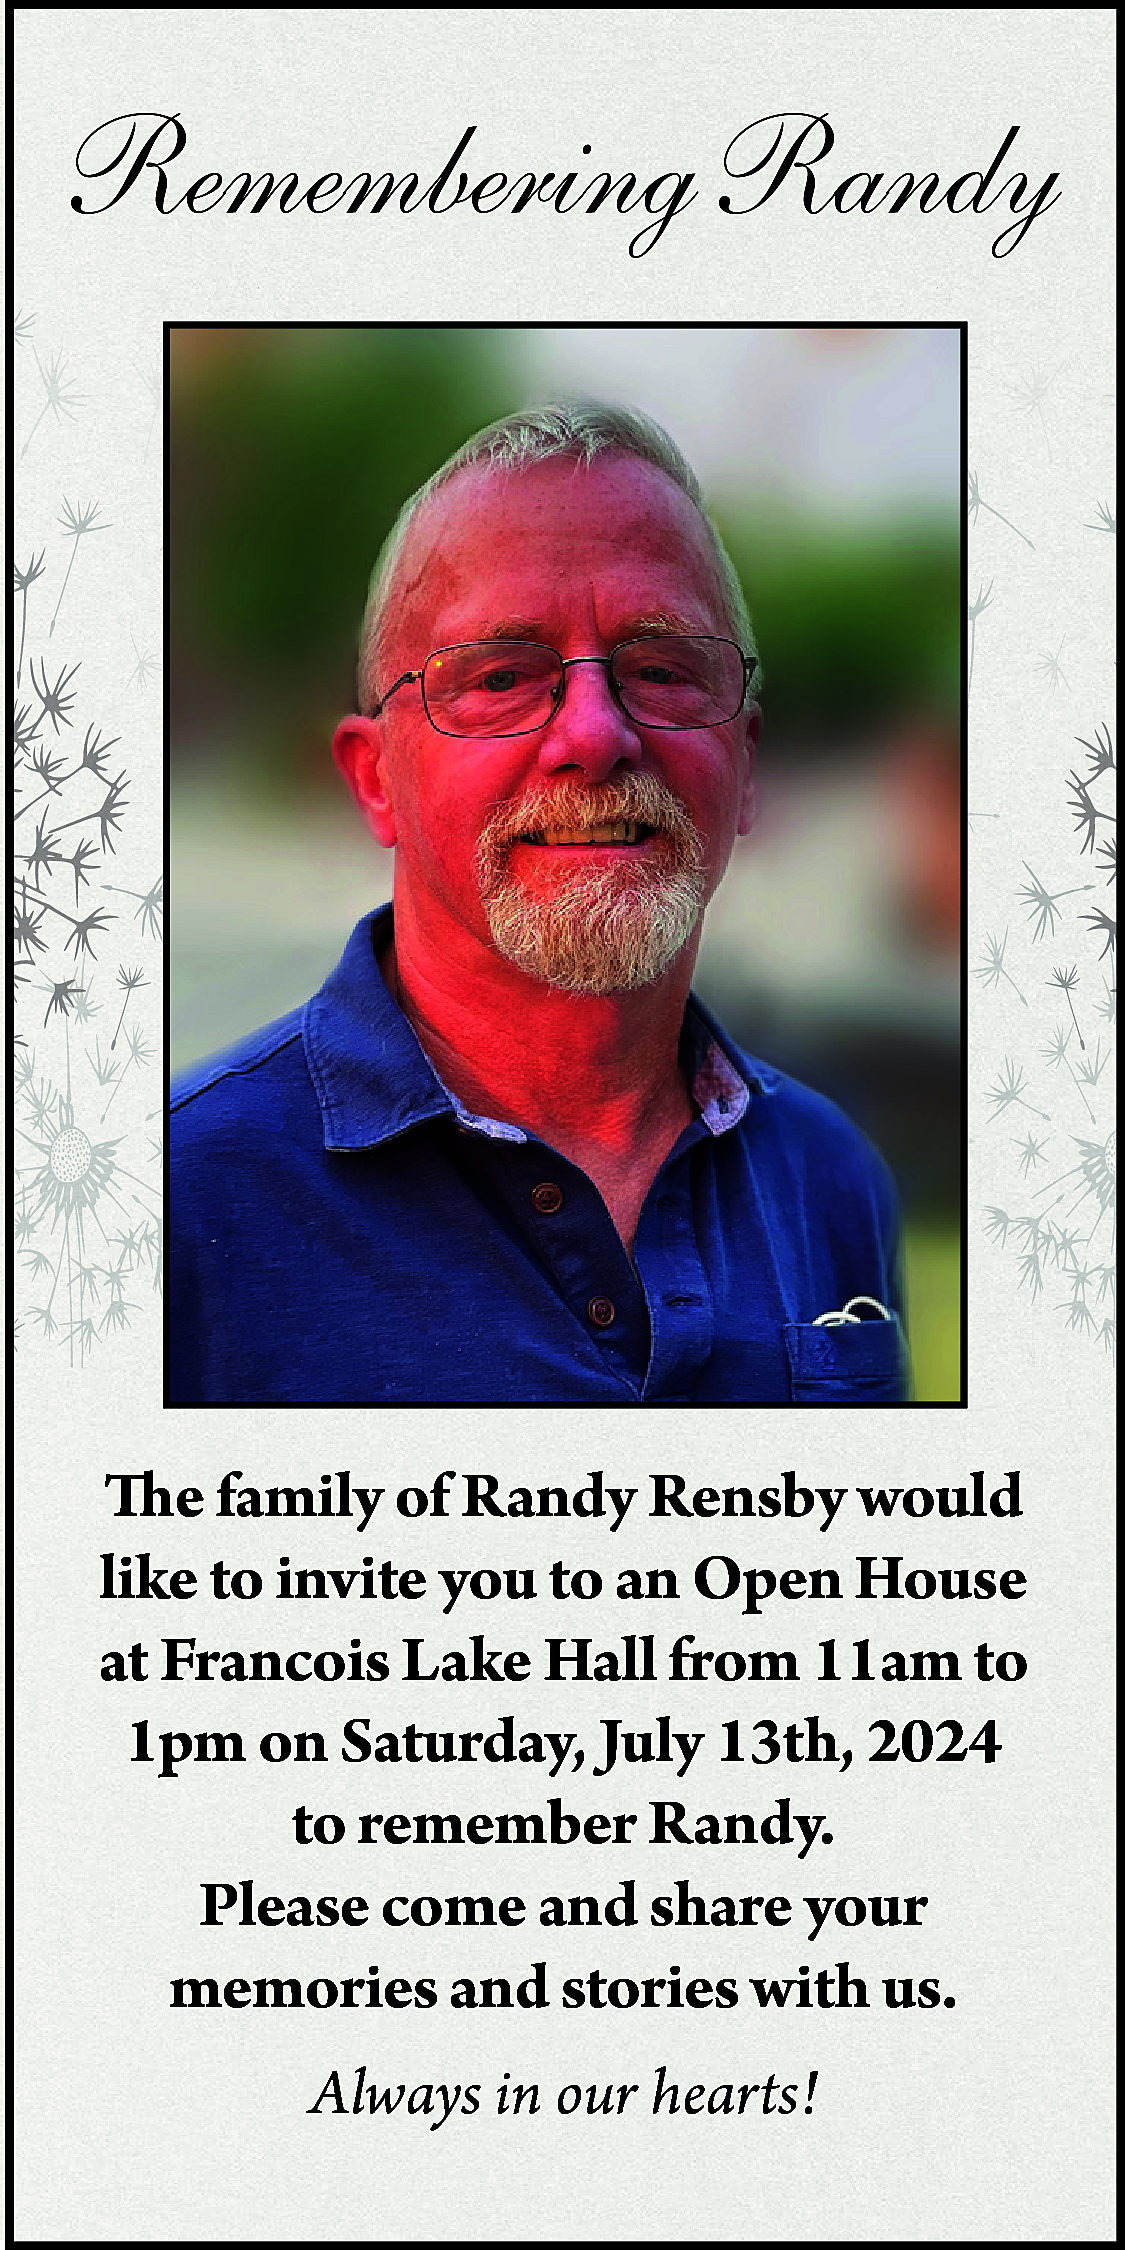 Remembering Randy <br> <br>The family  Remembering Randy    The family of Randy Rensby would  like to invite you to an Open House  at Francois Lake Hall from 11am to  1pm on Saturday, July 13th, 2024  to remember Randy.  Please come and share your  memories and stories with us.  Always in our hearts!    